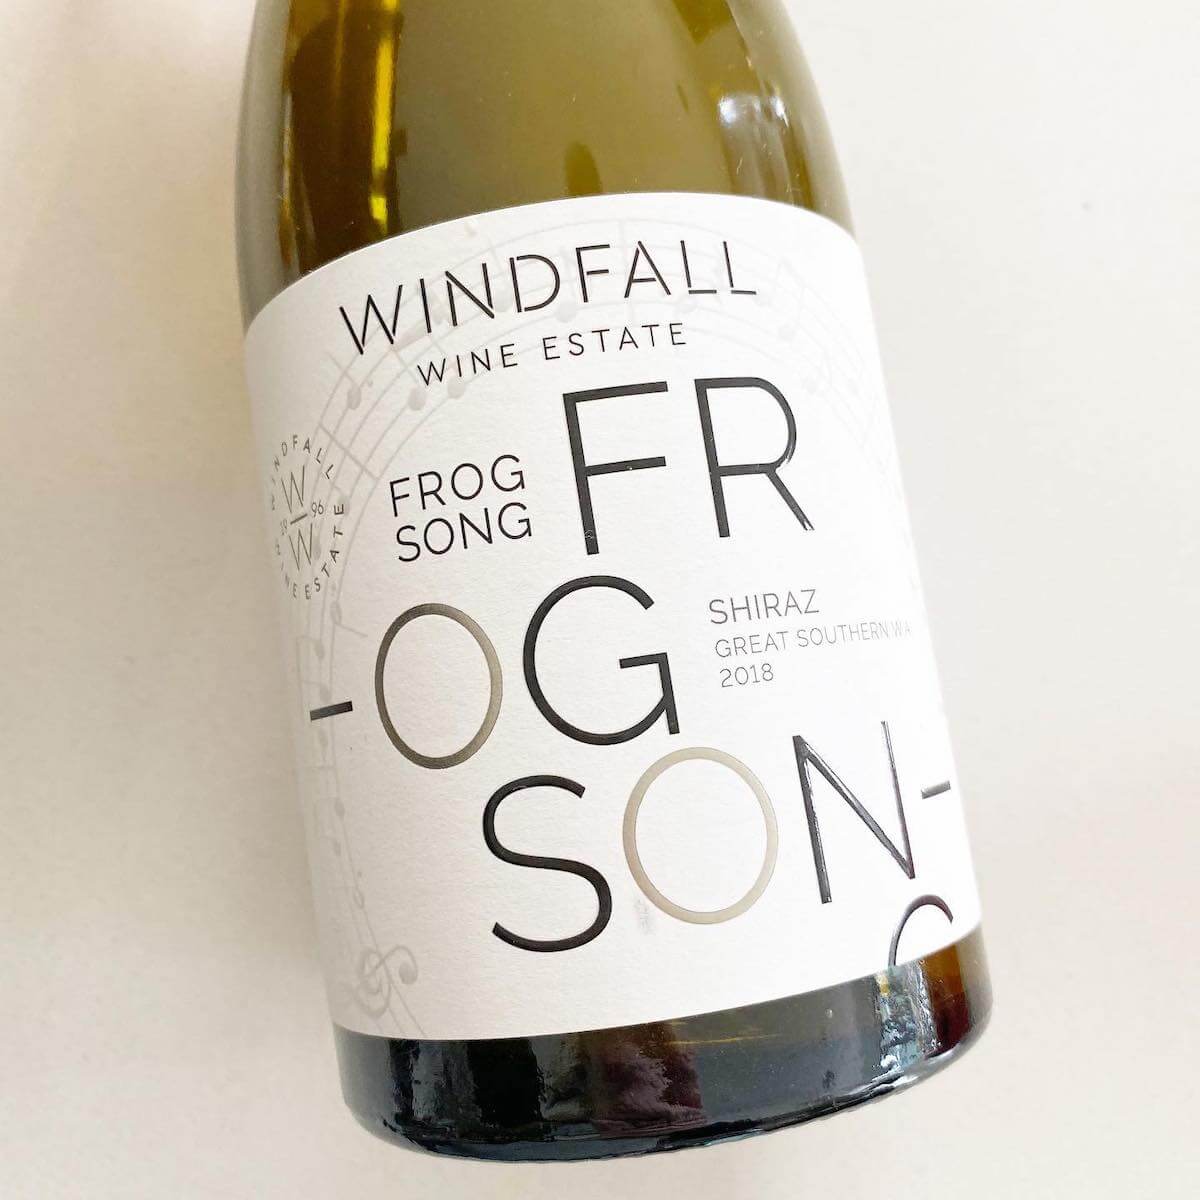 Windfall Wine Estate 2018 Frog Song Shiraz - Great Southern